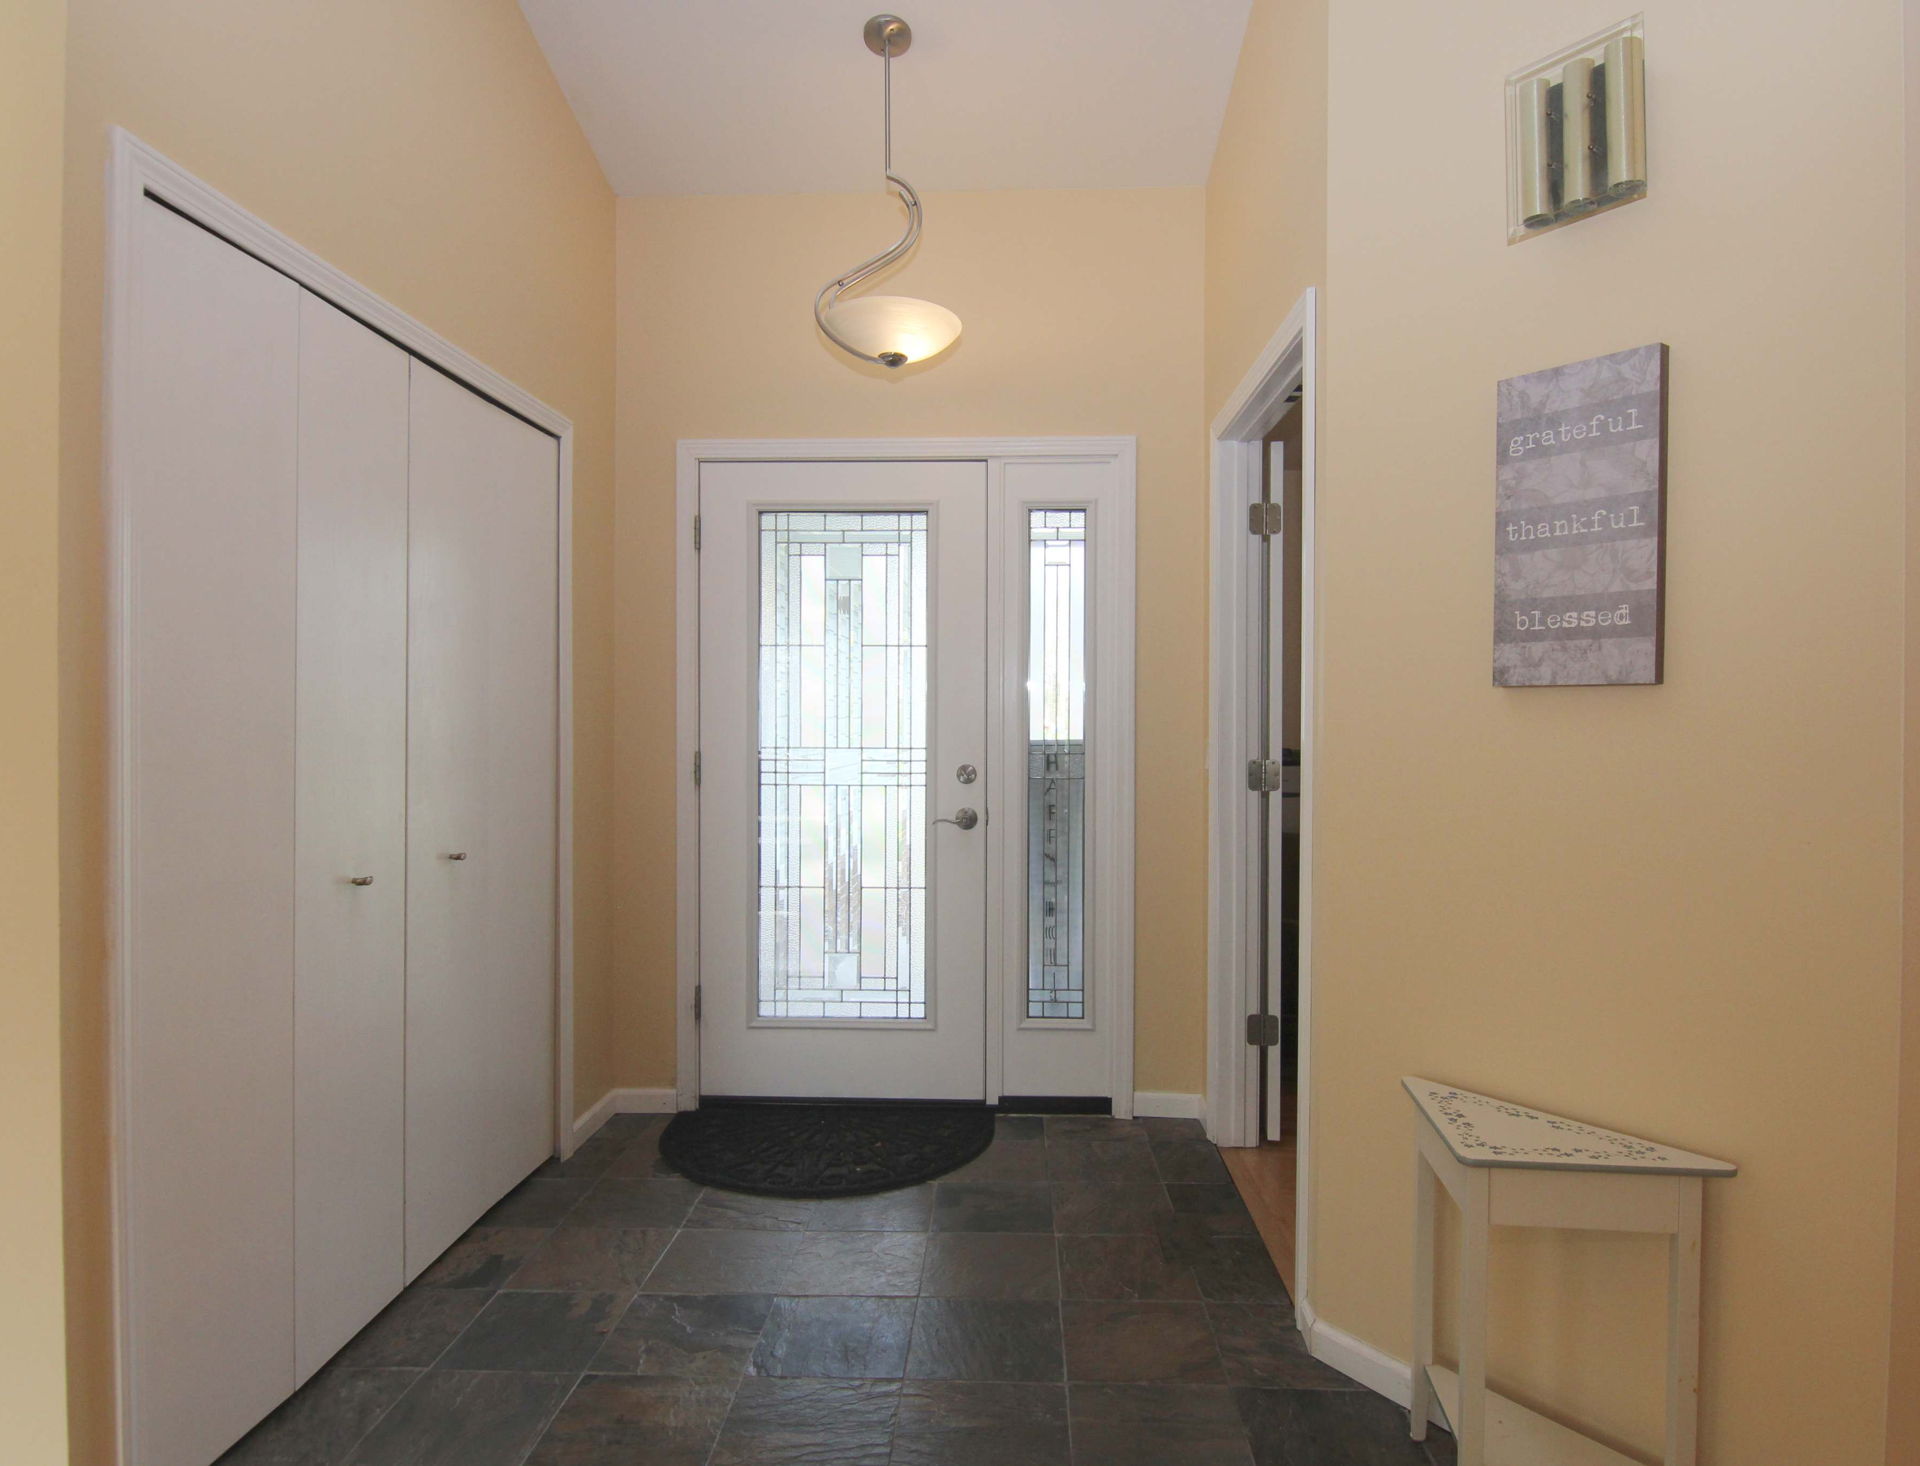 foyer featuring tile floors and natural light